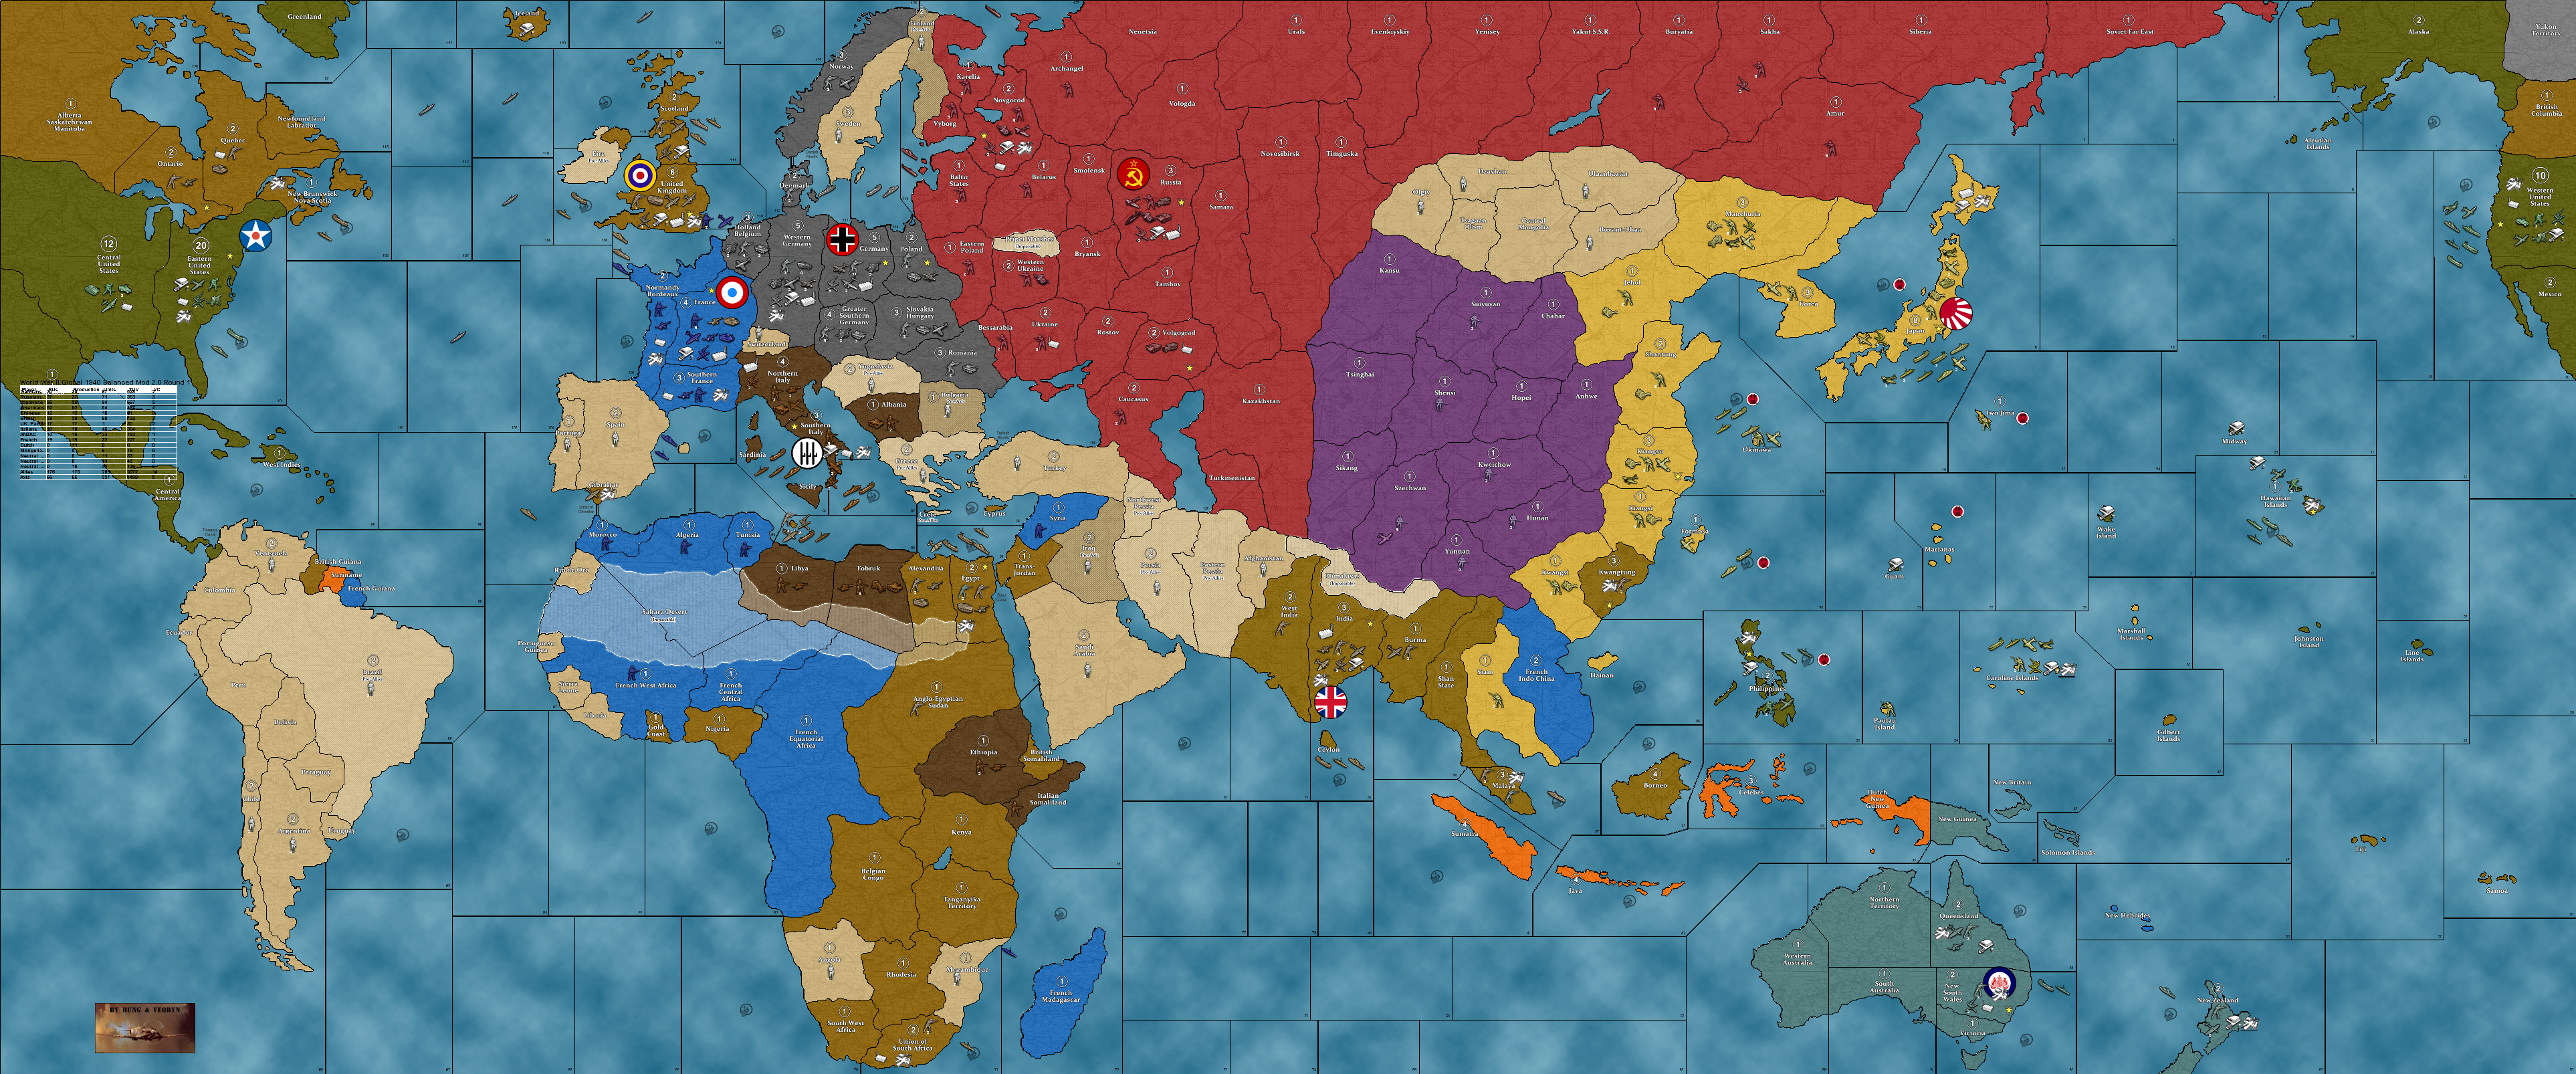 axis and allies mods